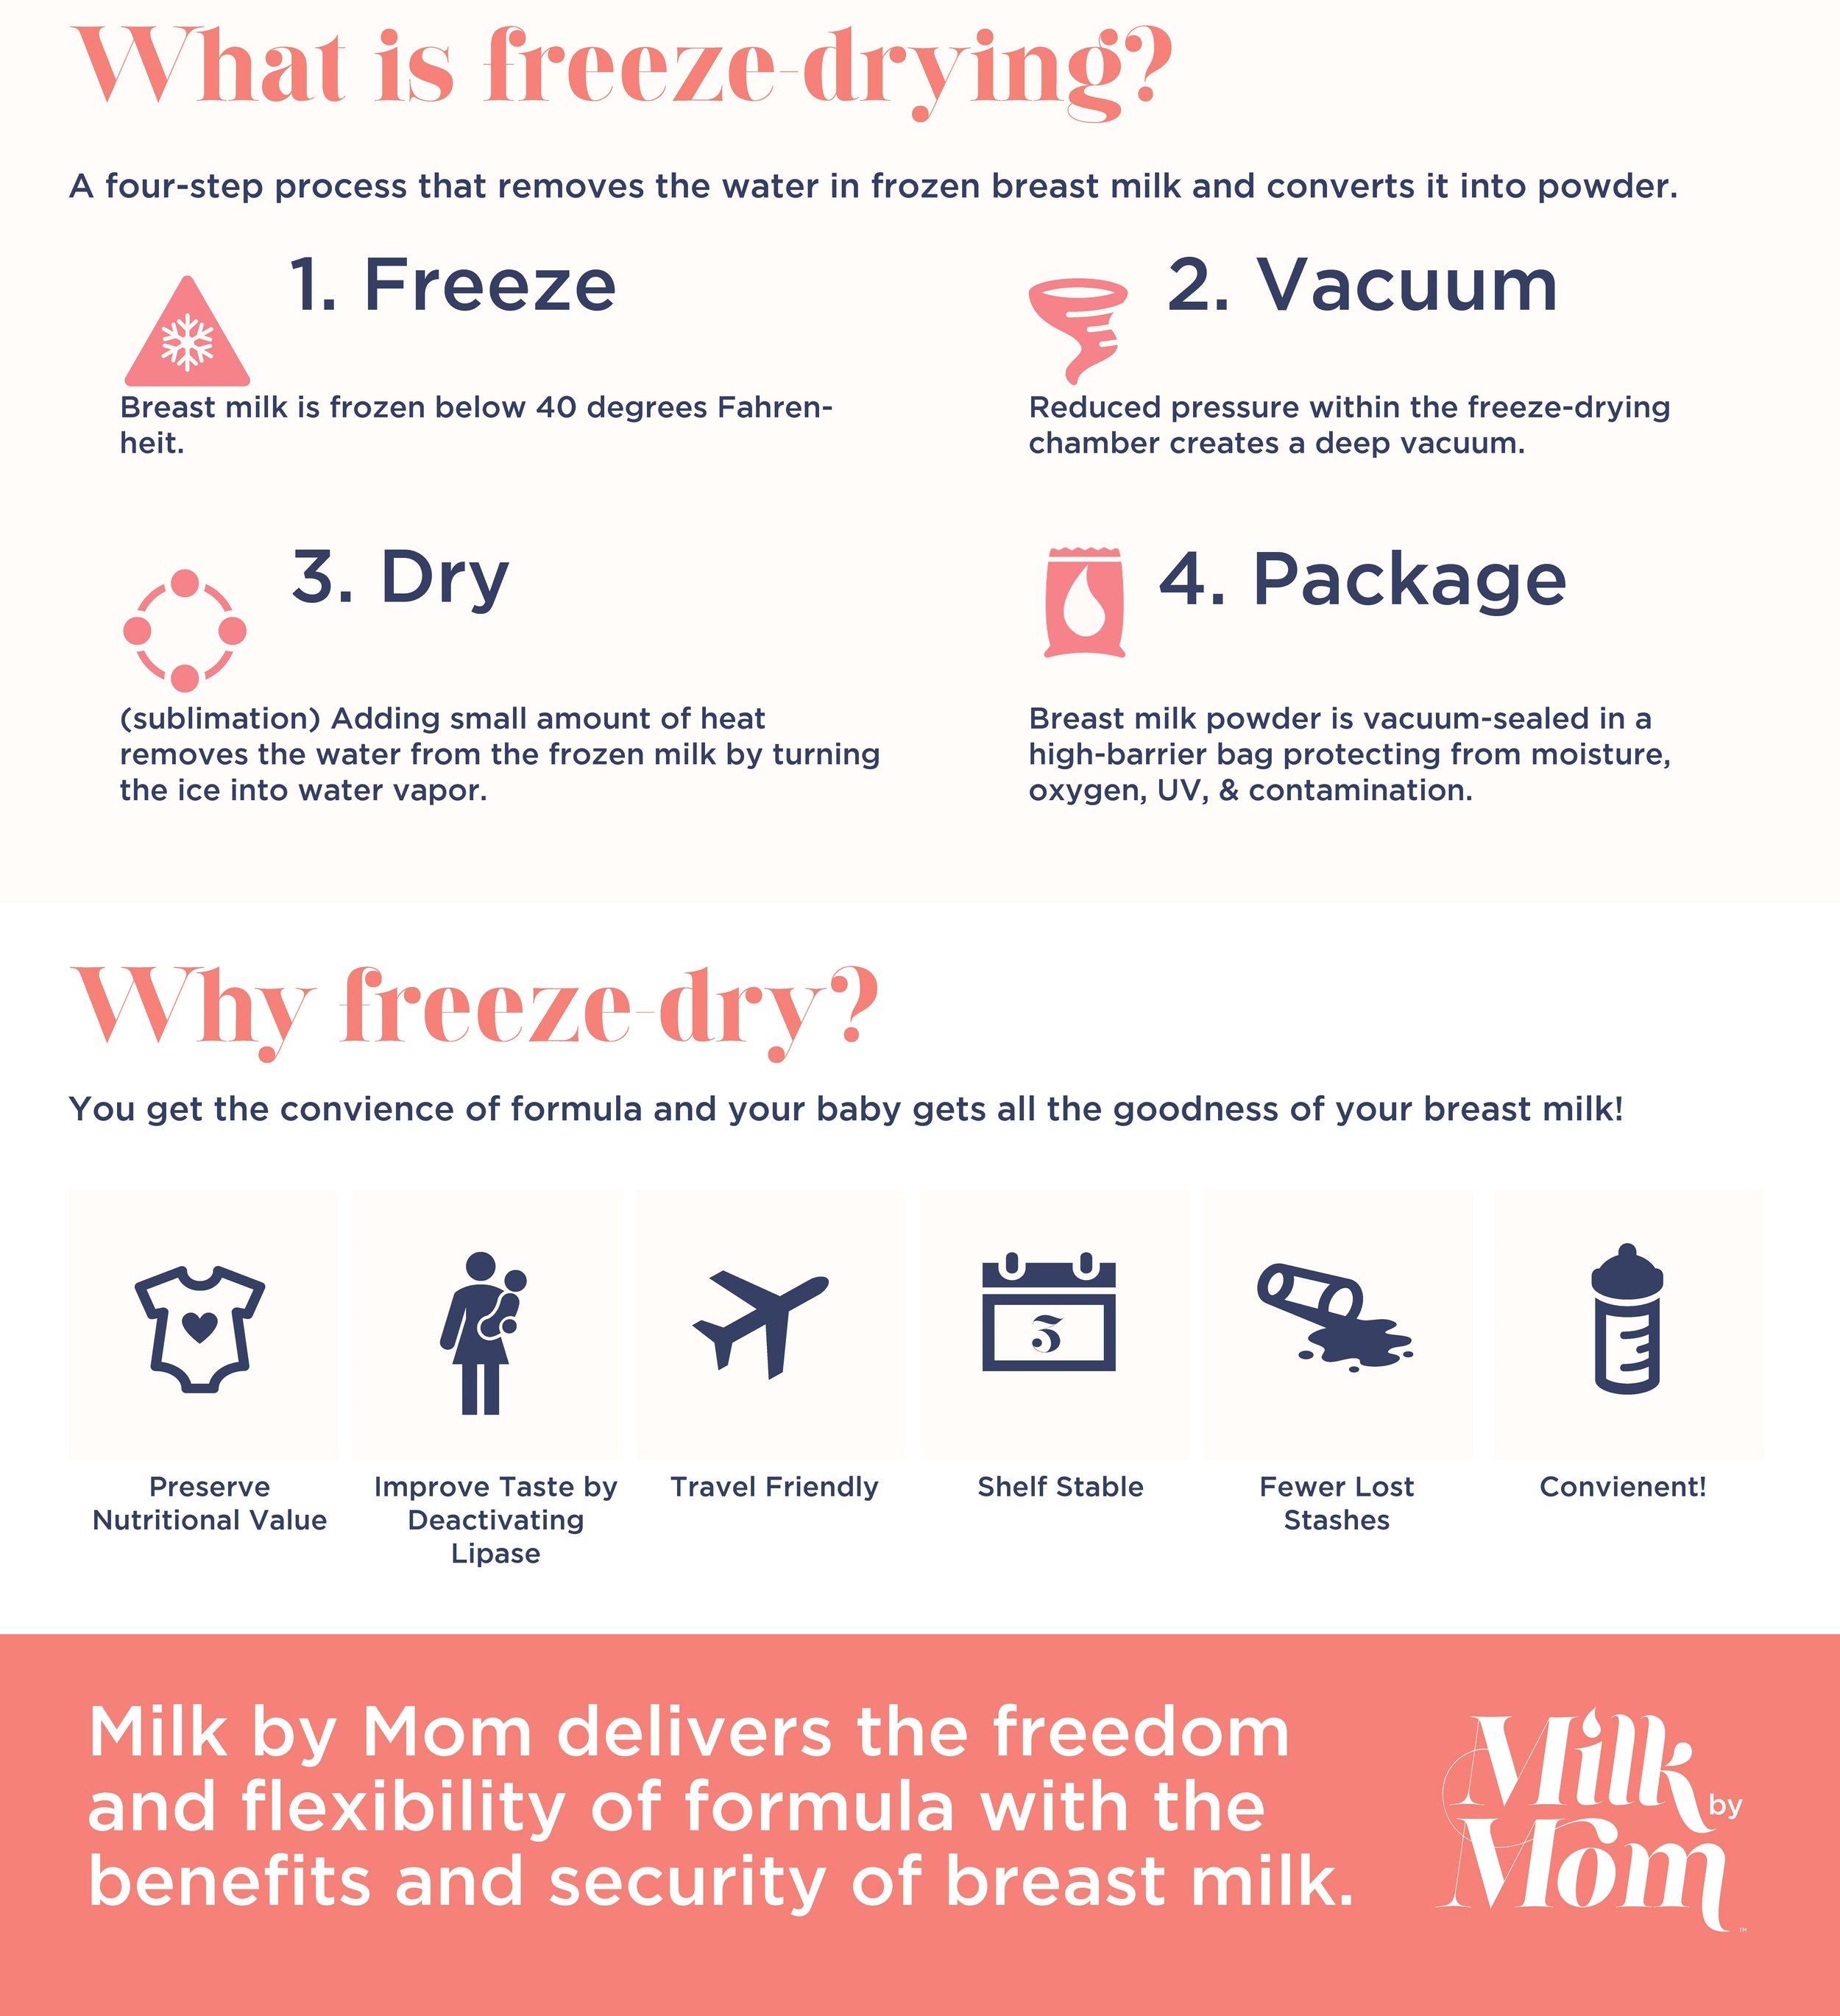 Freeze Dry Your Breast Milk - The Best Solution For Breastmilk